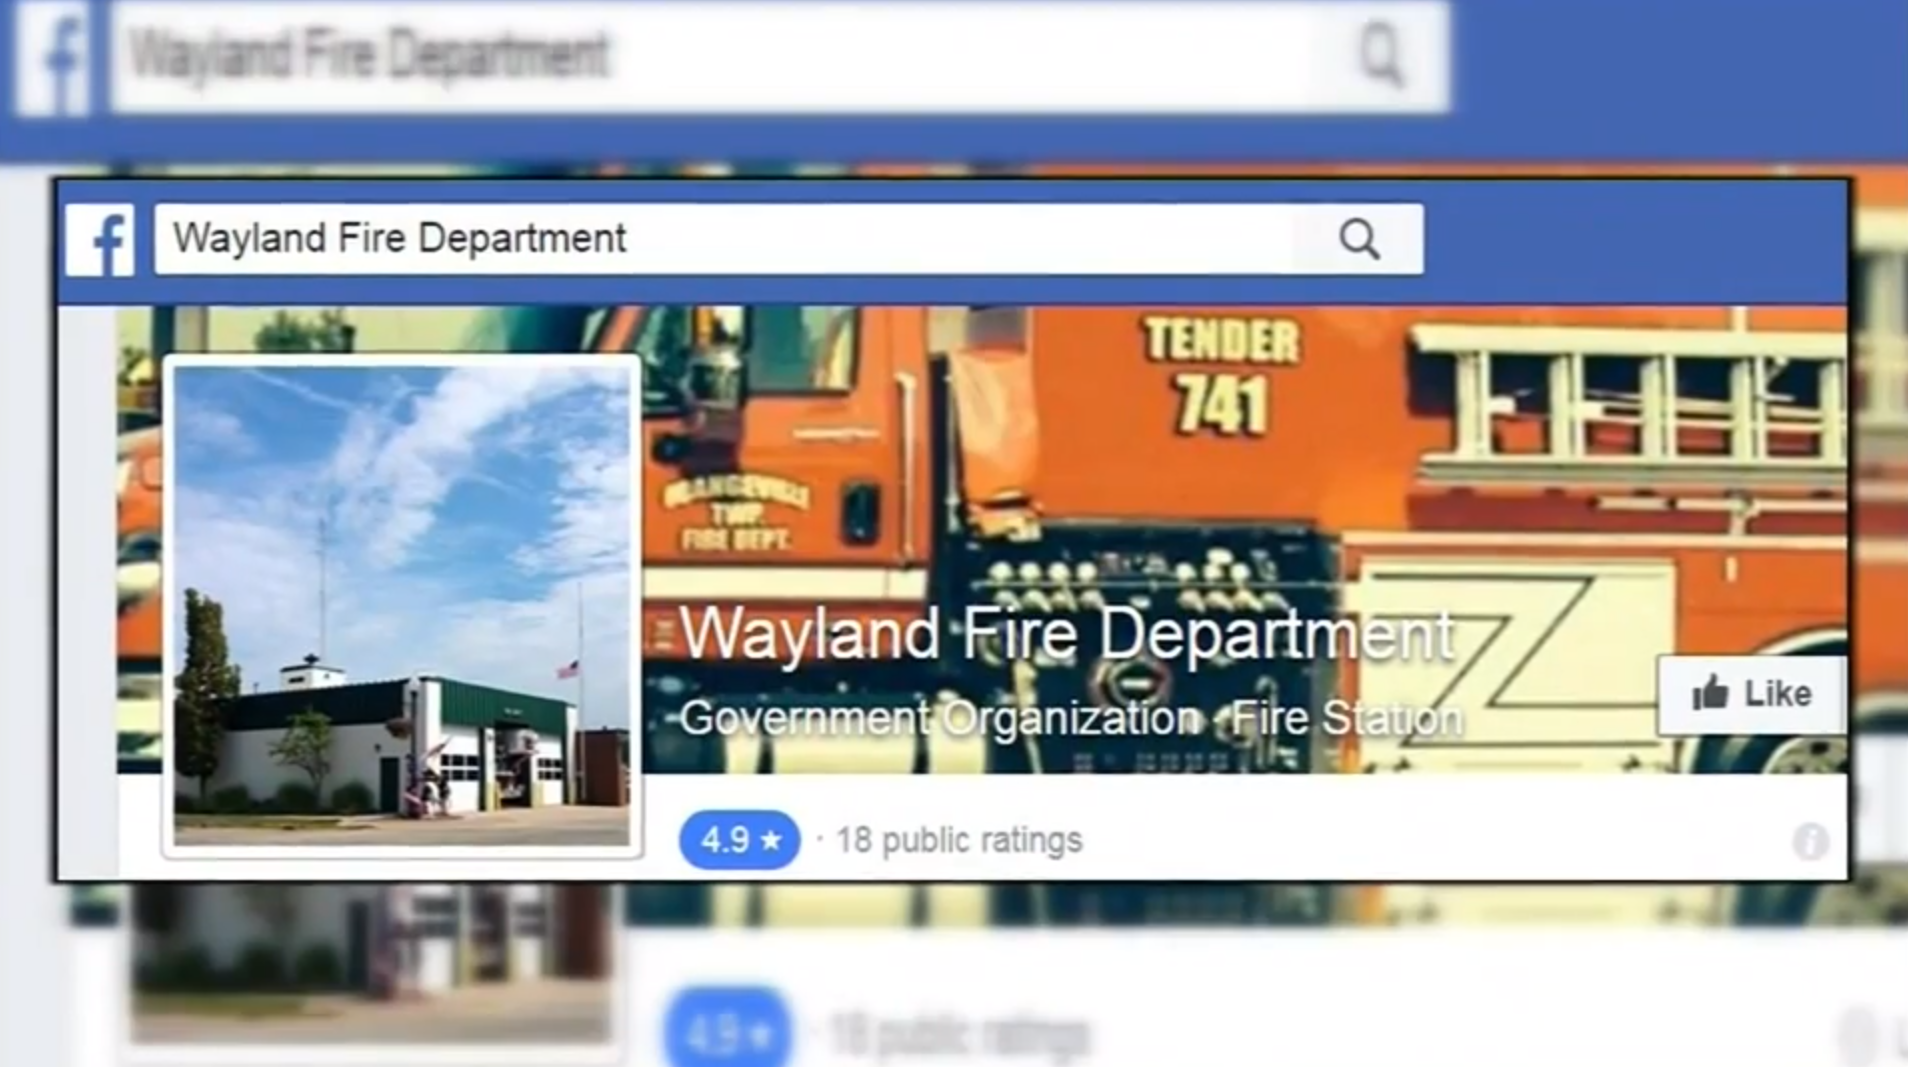 Firefighters contacted via Facebook save choking boy 800 miles away